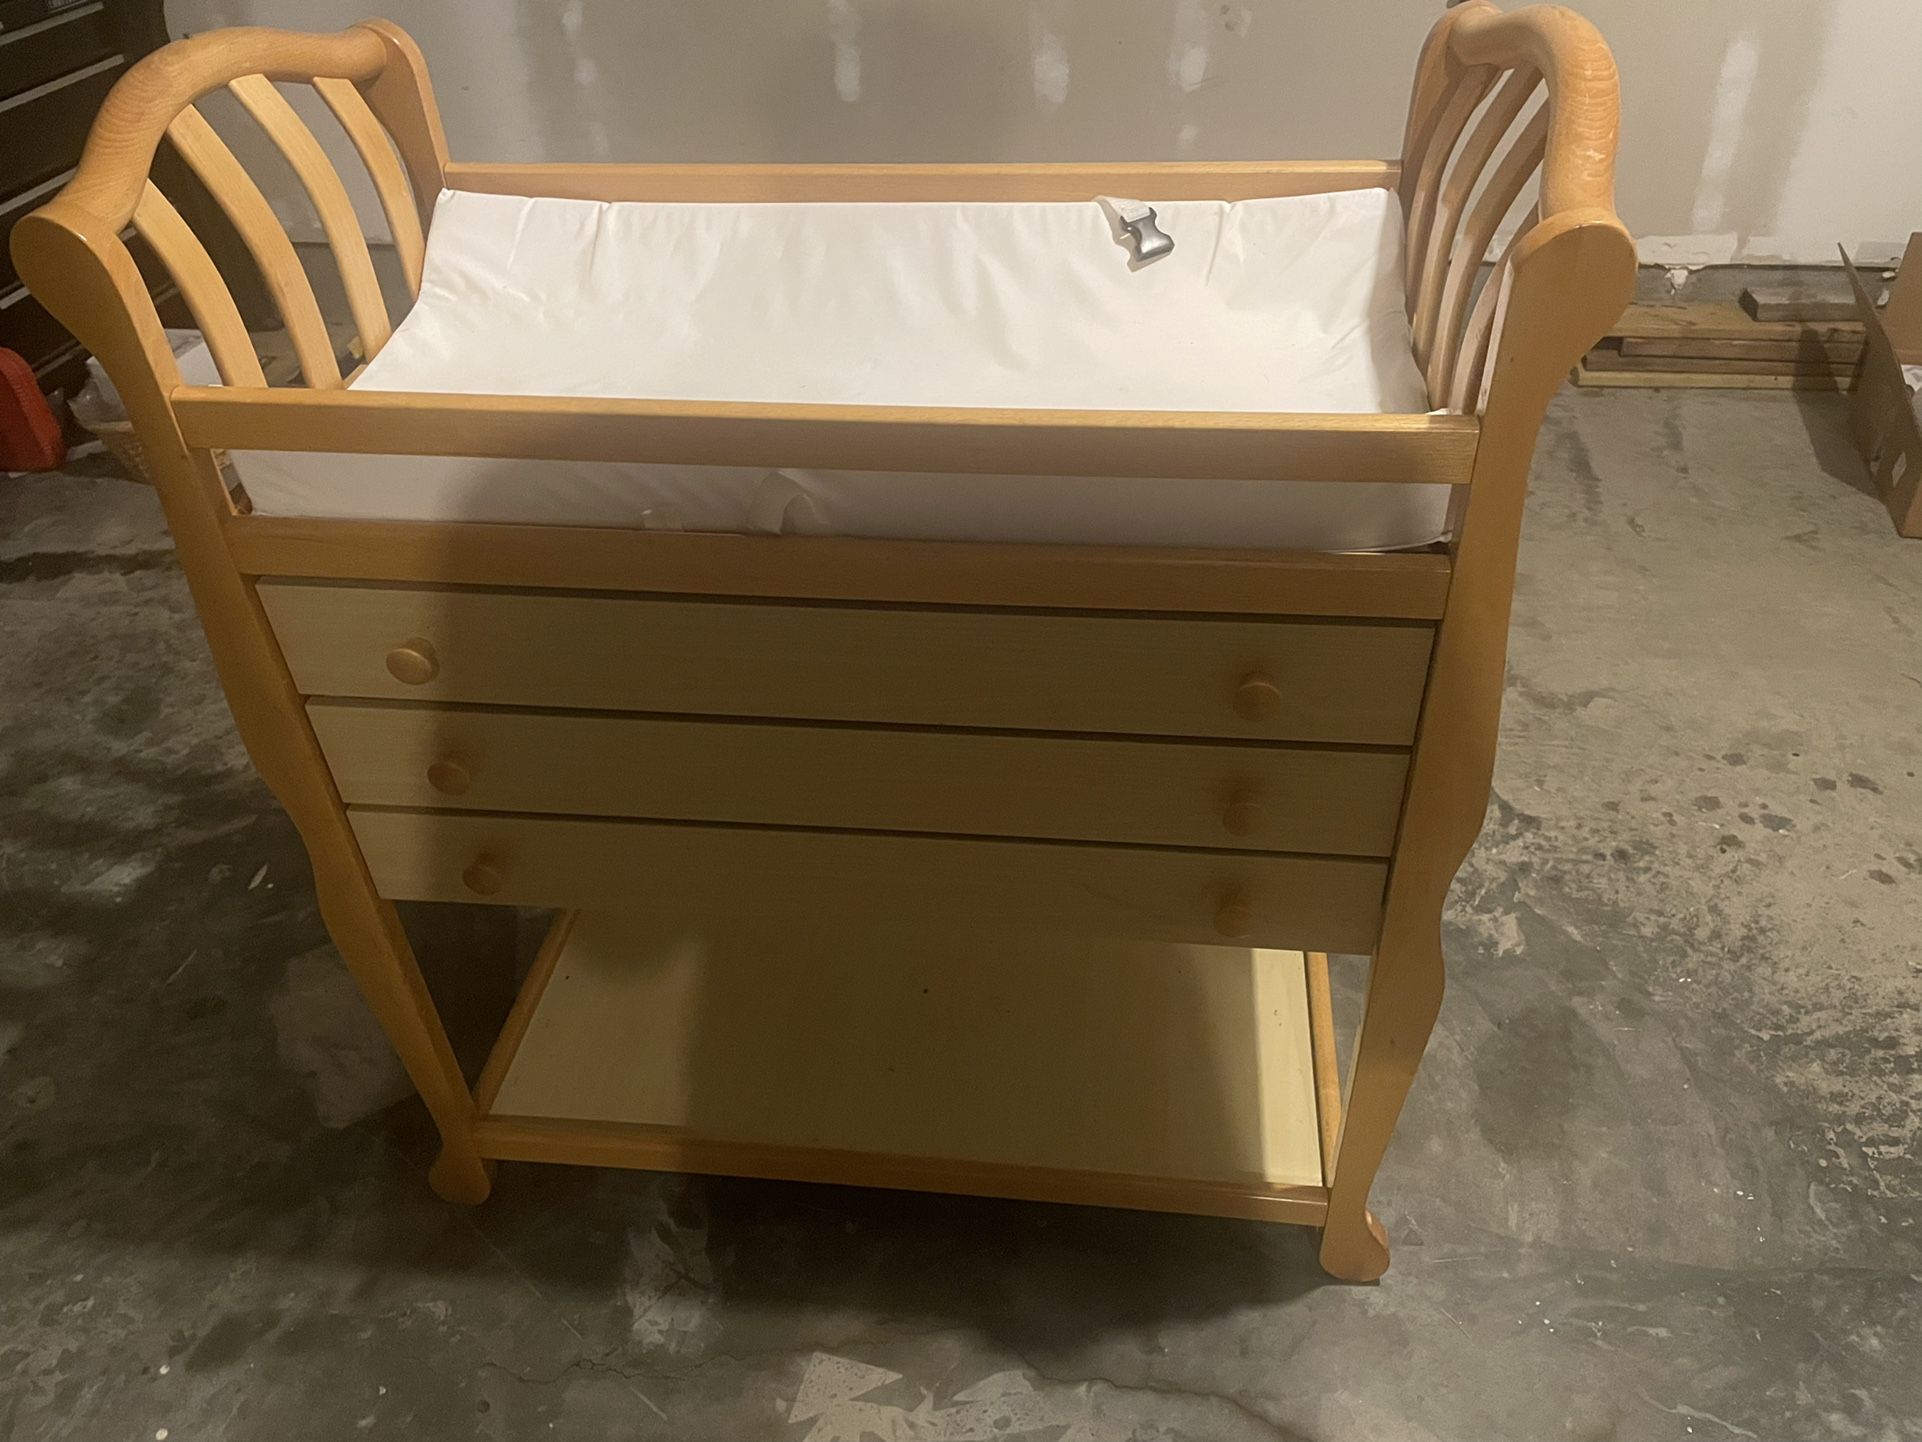 Diaper changing table, Real Wood